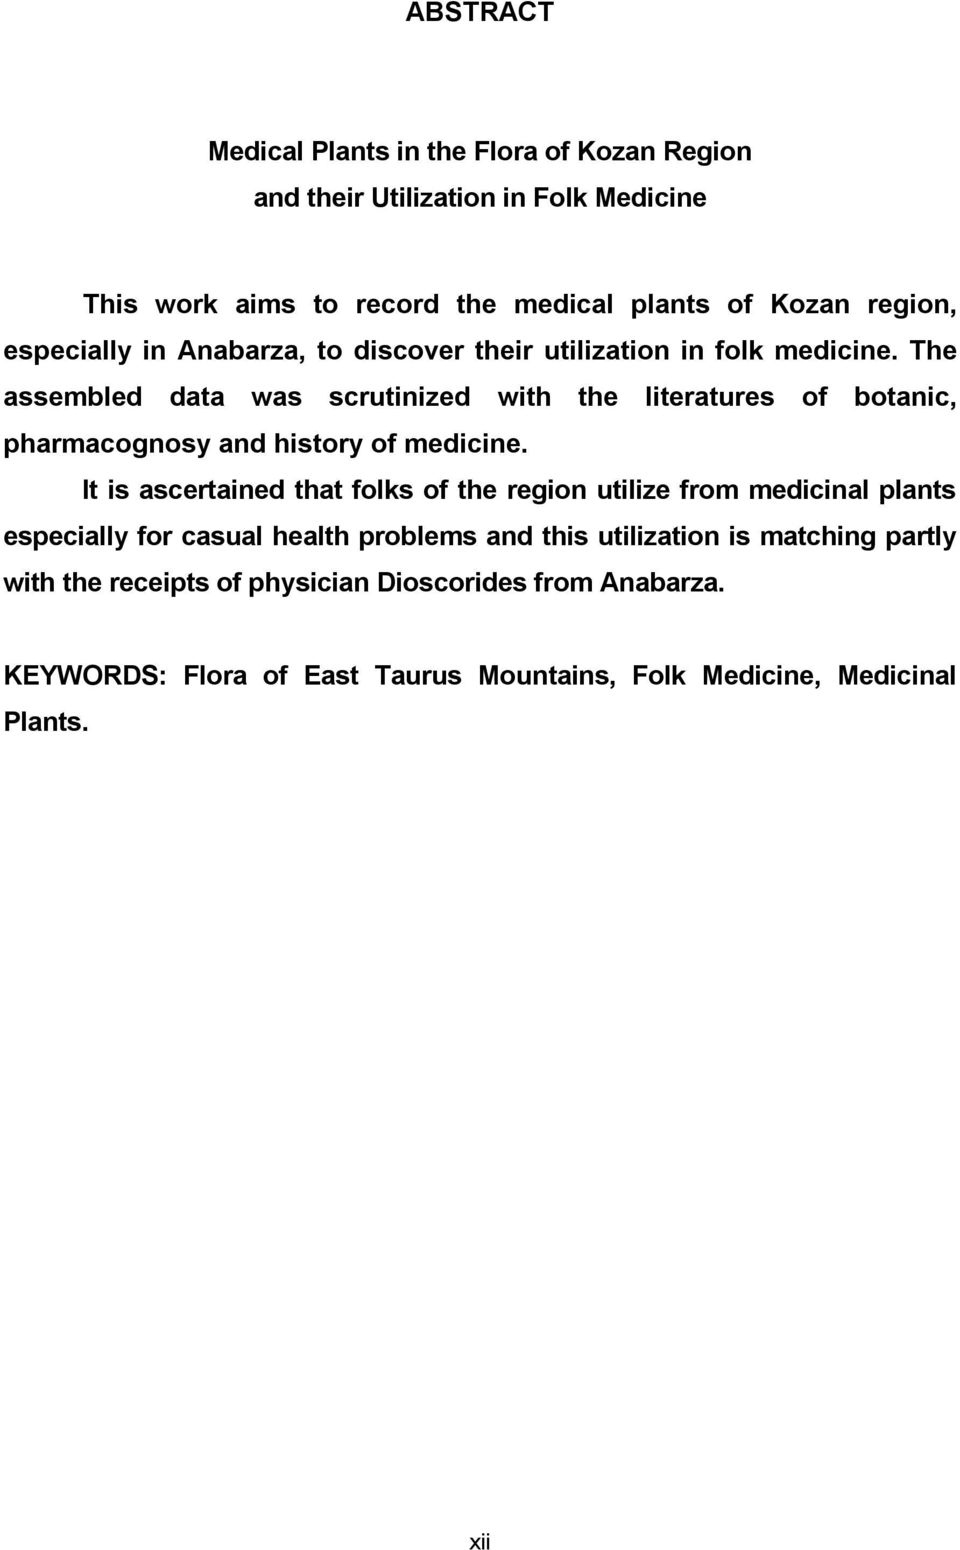 The assembled data was scrutinized with the literatures of botanic, pharmacognosy and history of medicine.